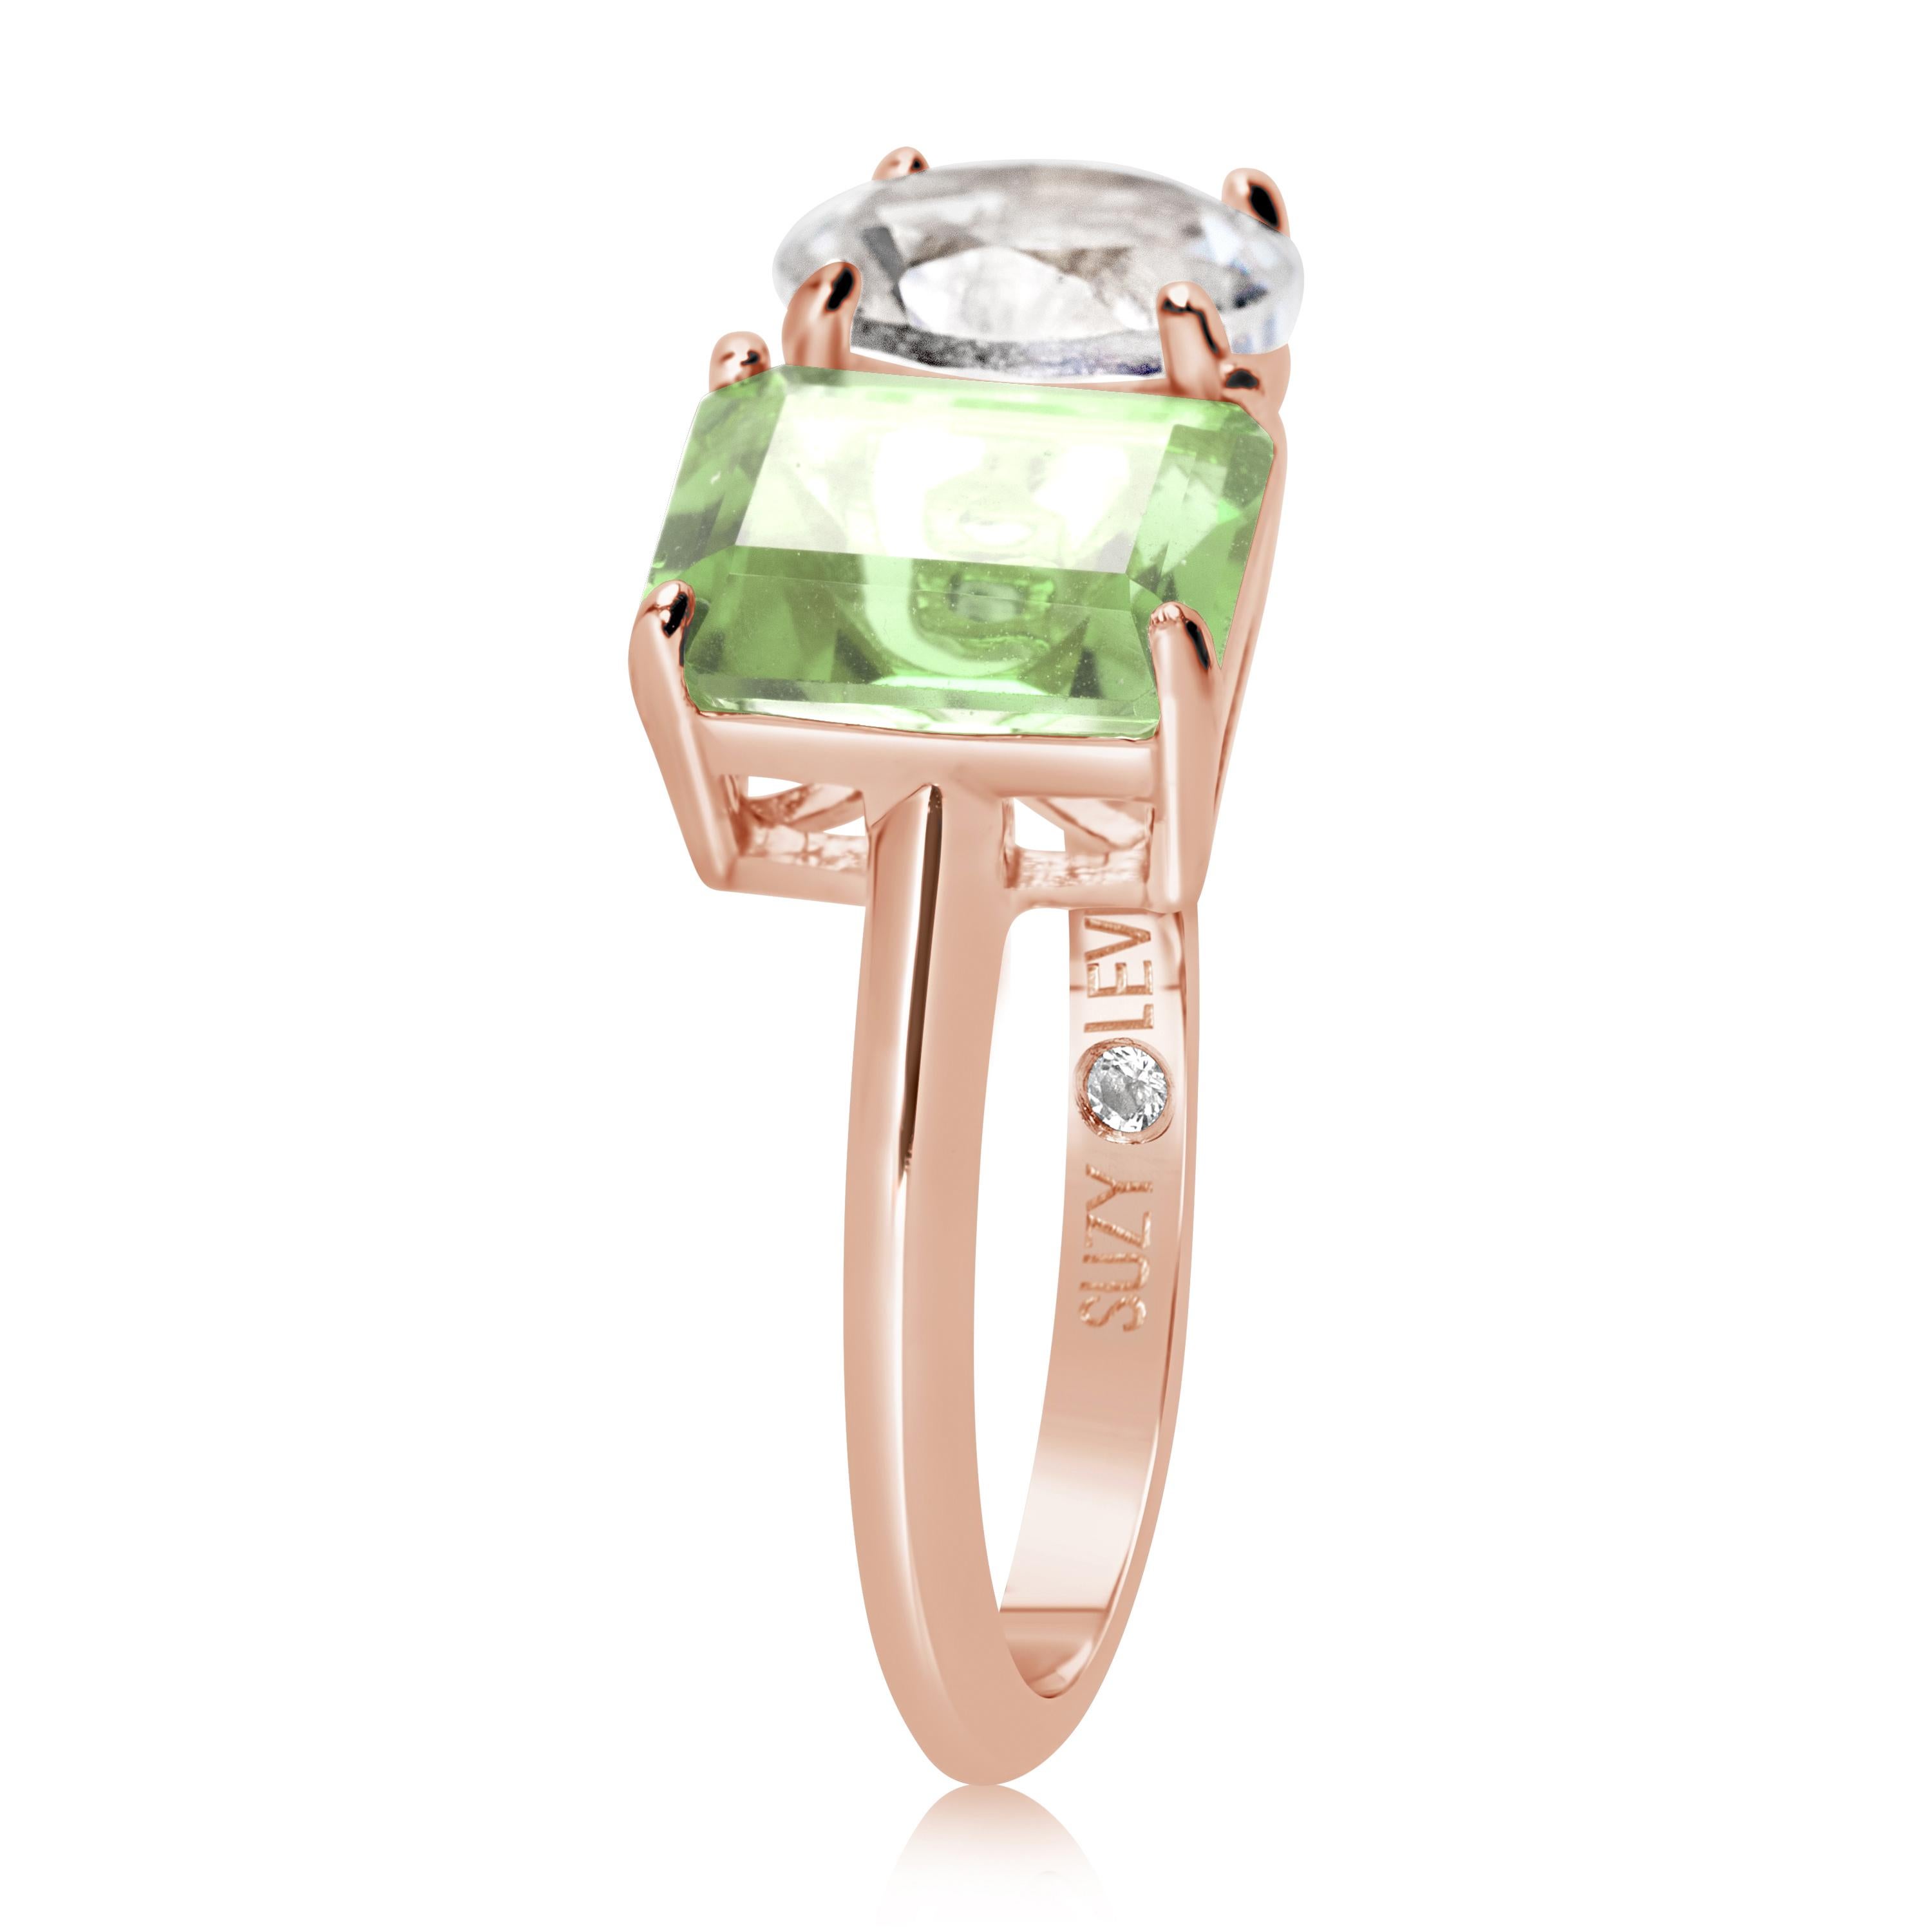 Shimmering in hues of white and green, this Suzy Levian ring is as on trend as can be, and features a round cut white topaz and an emerald cut green amethyst as a perfectly matched pair. This ring symbolizes a perfect pairing of unique shapes. This